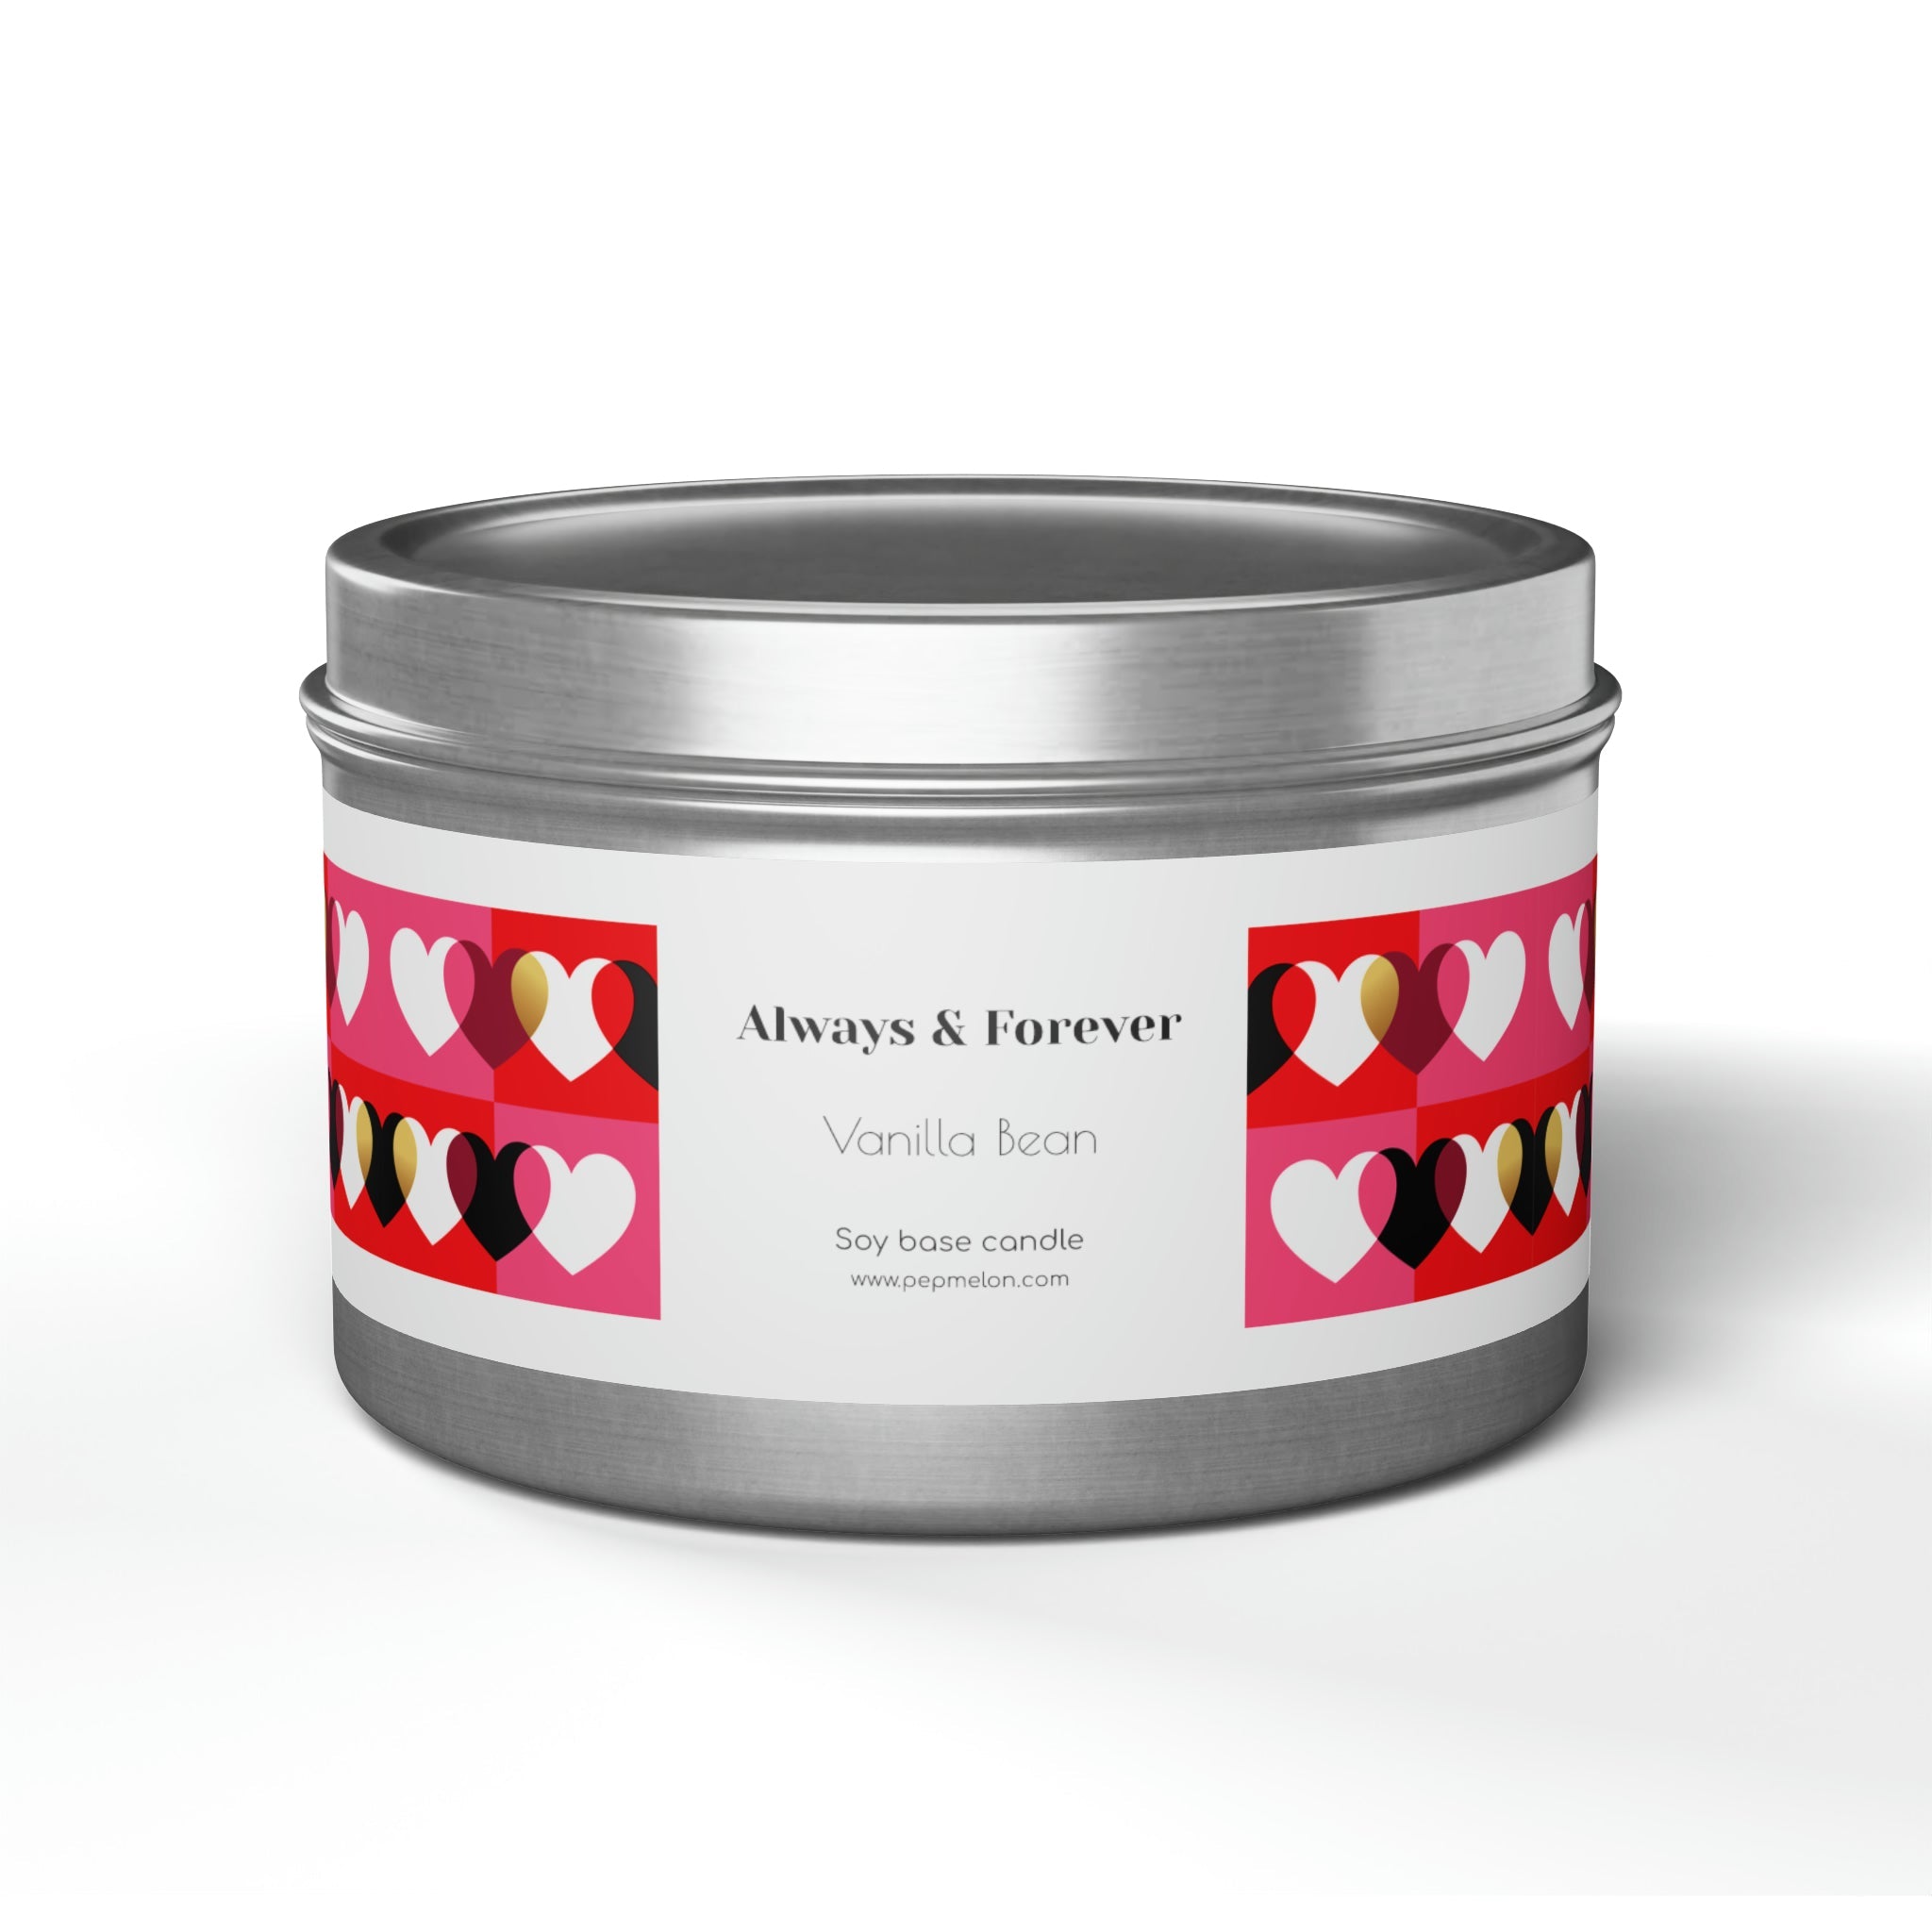 Vanilla Bean Always & Forever Soy base candle love, valentine's day gift Tin Candles-5